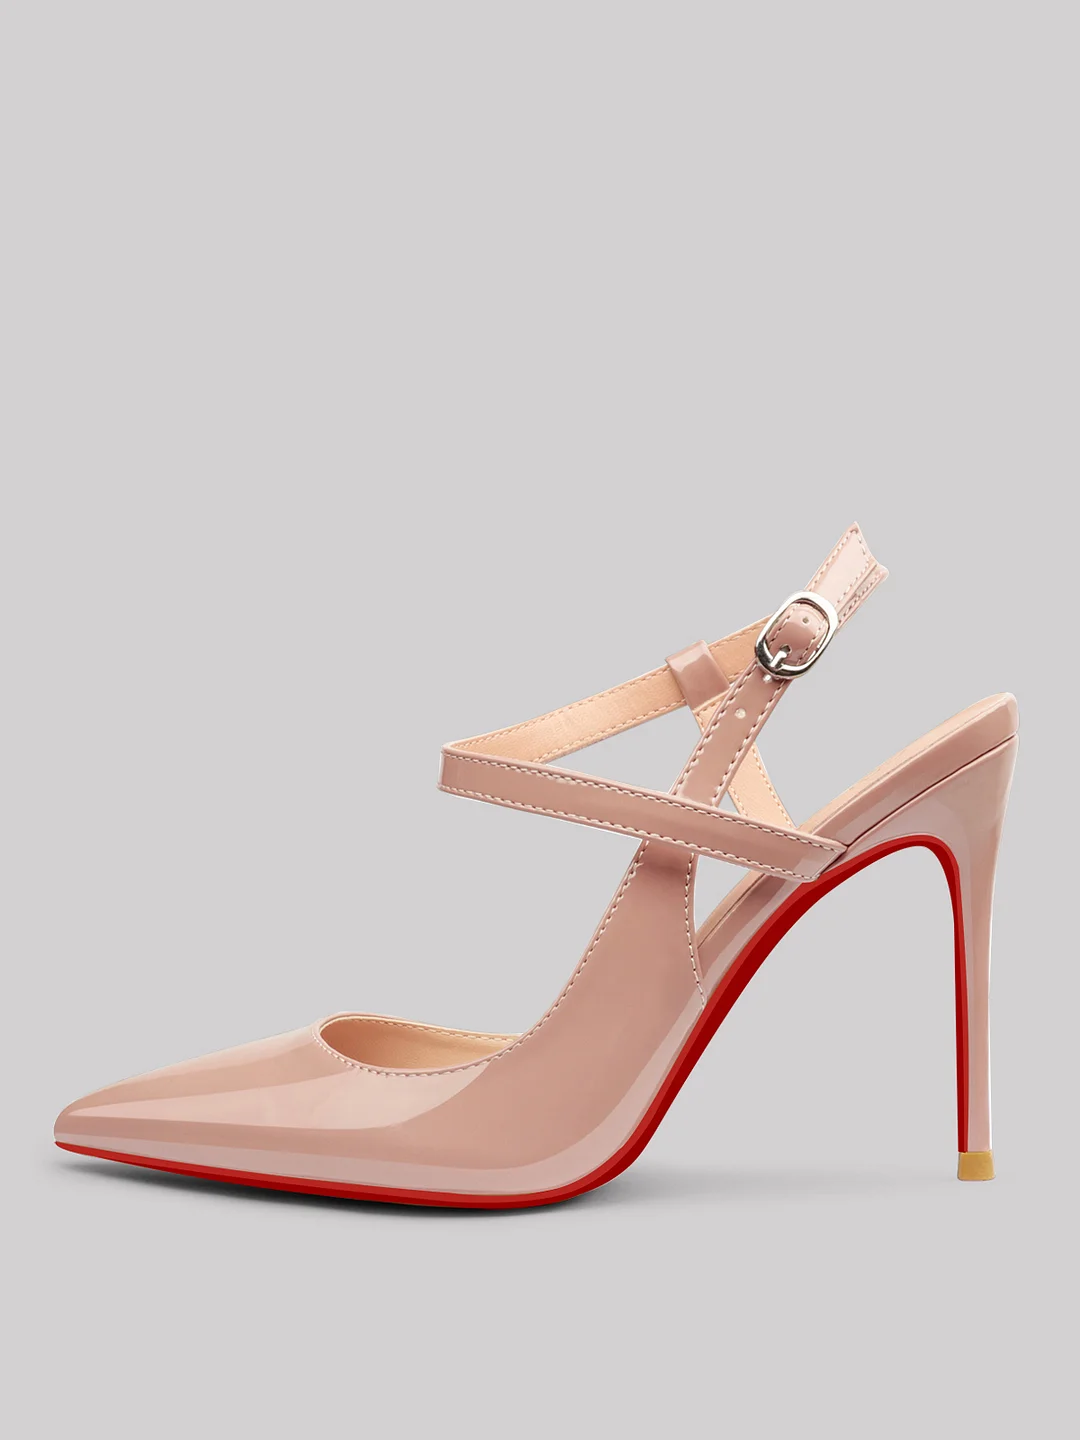 100mm Women Slingback Pumps Ankle Strap Jenlove Stiletto Mid Heel Close Pointed Toe Dress Red Bottoms Shoes